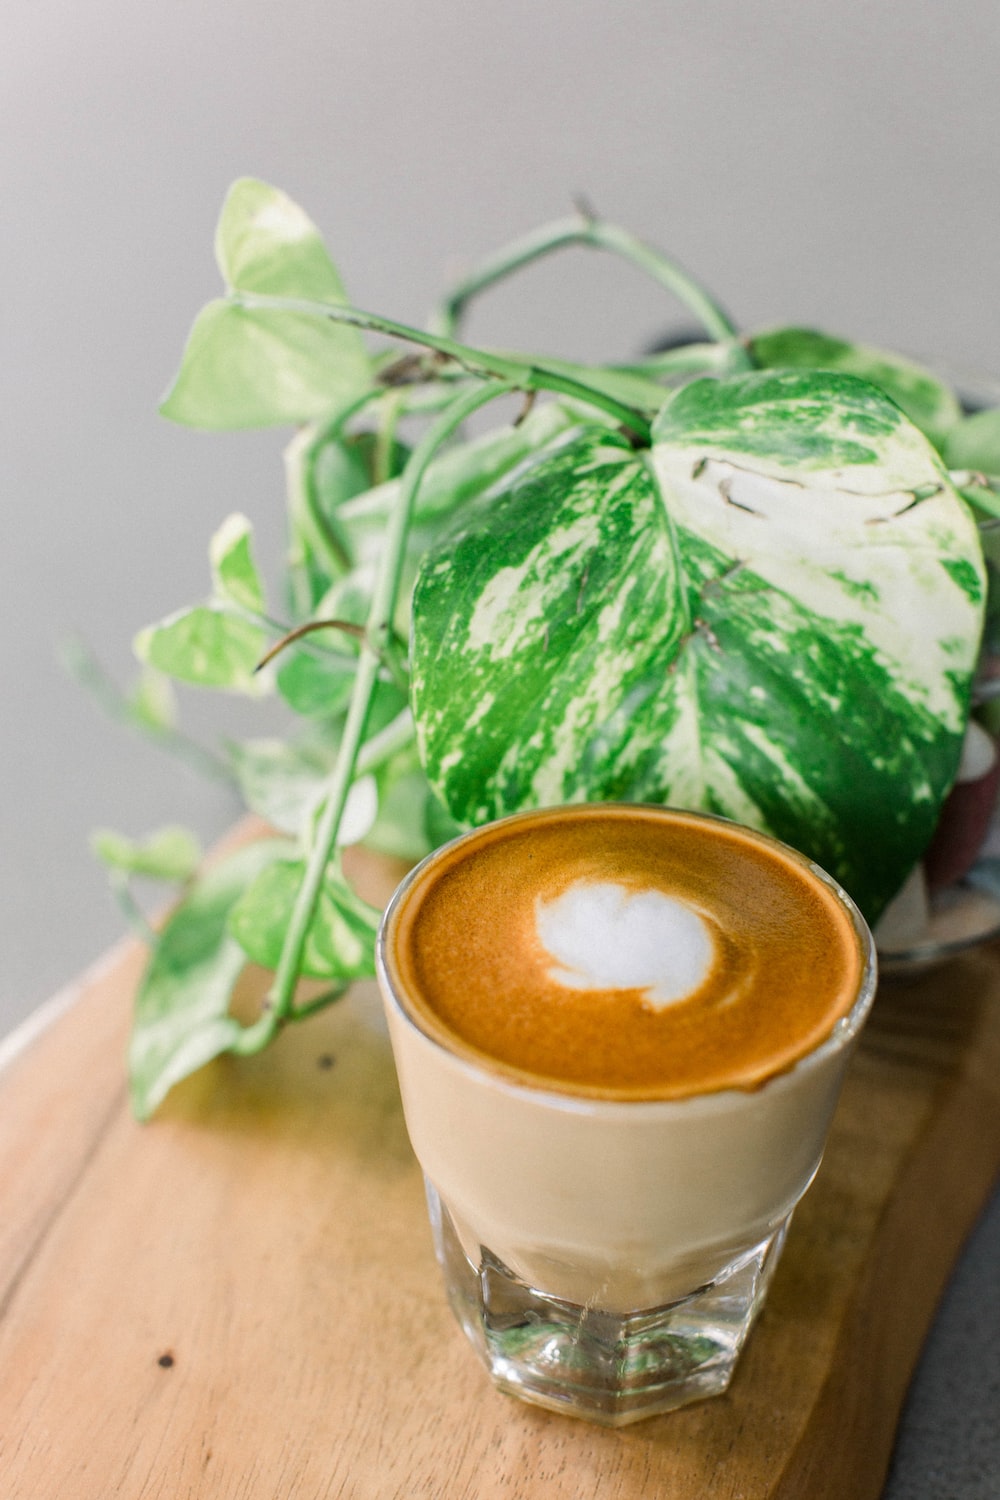 cappuccino beside green plant